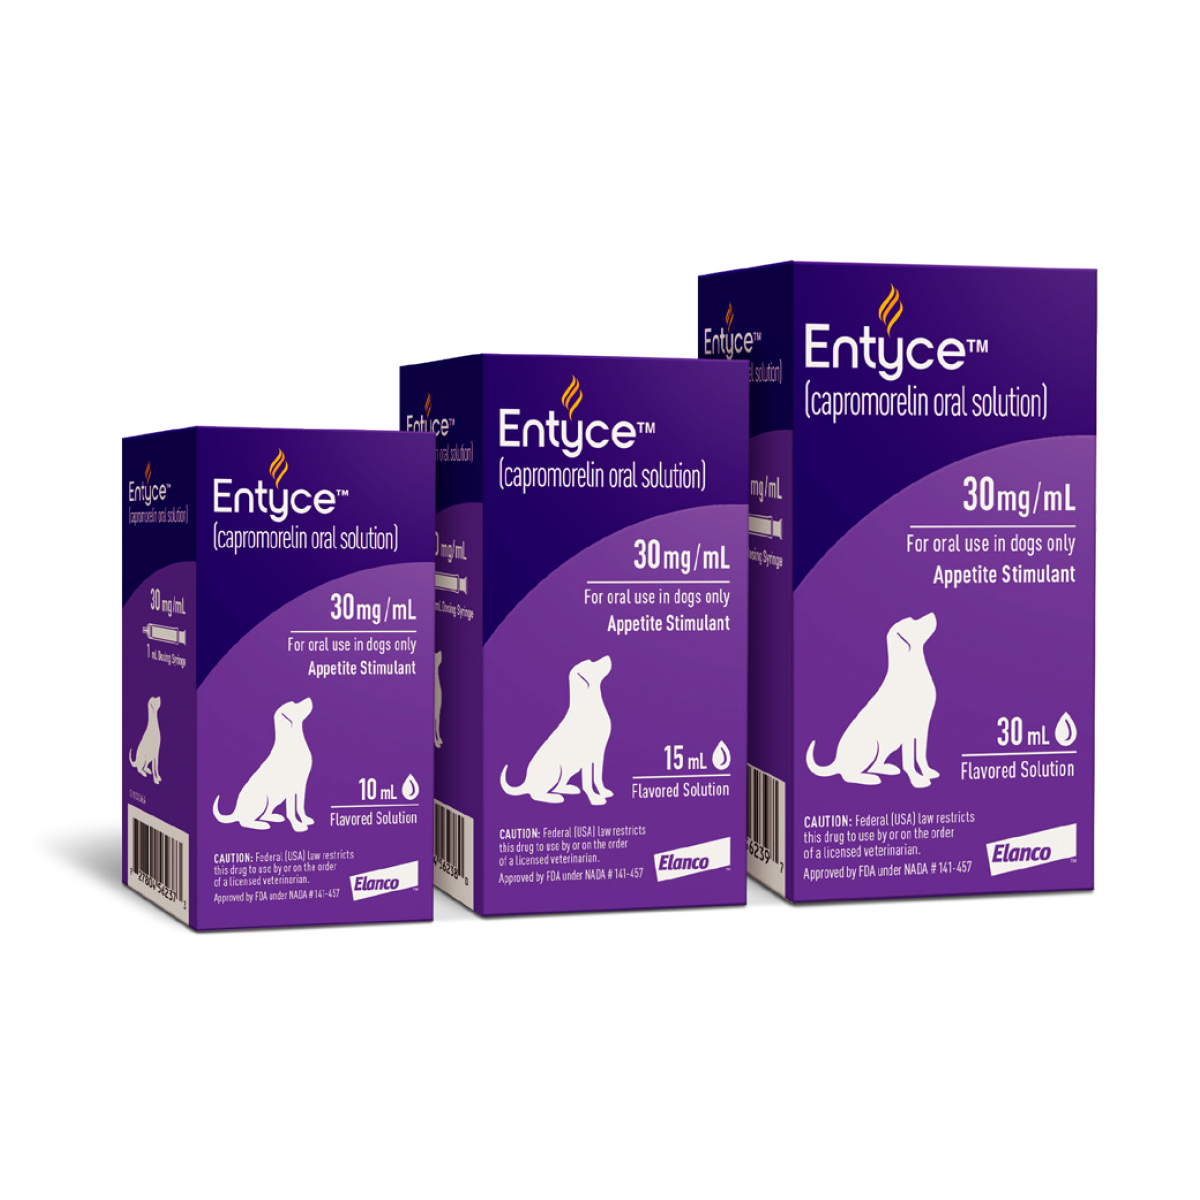 A bottle of Entyce stands next to its purple packaging box.